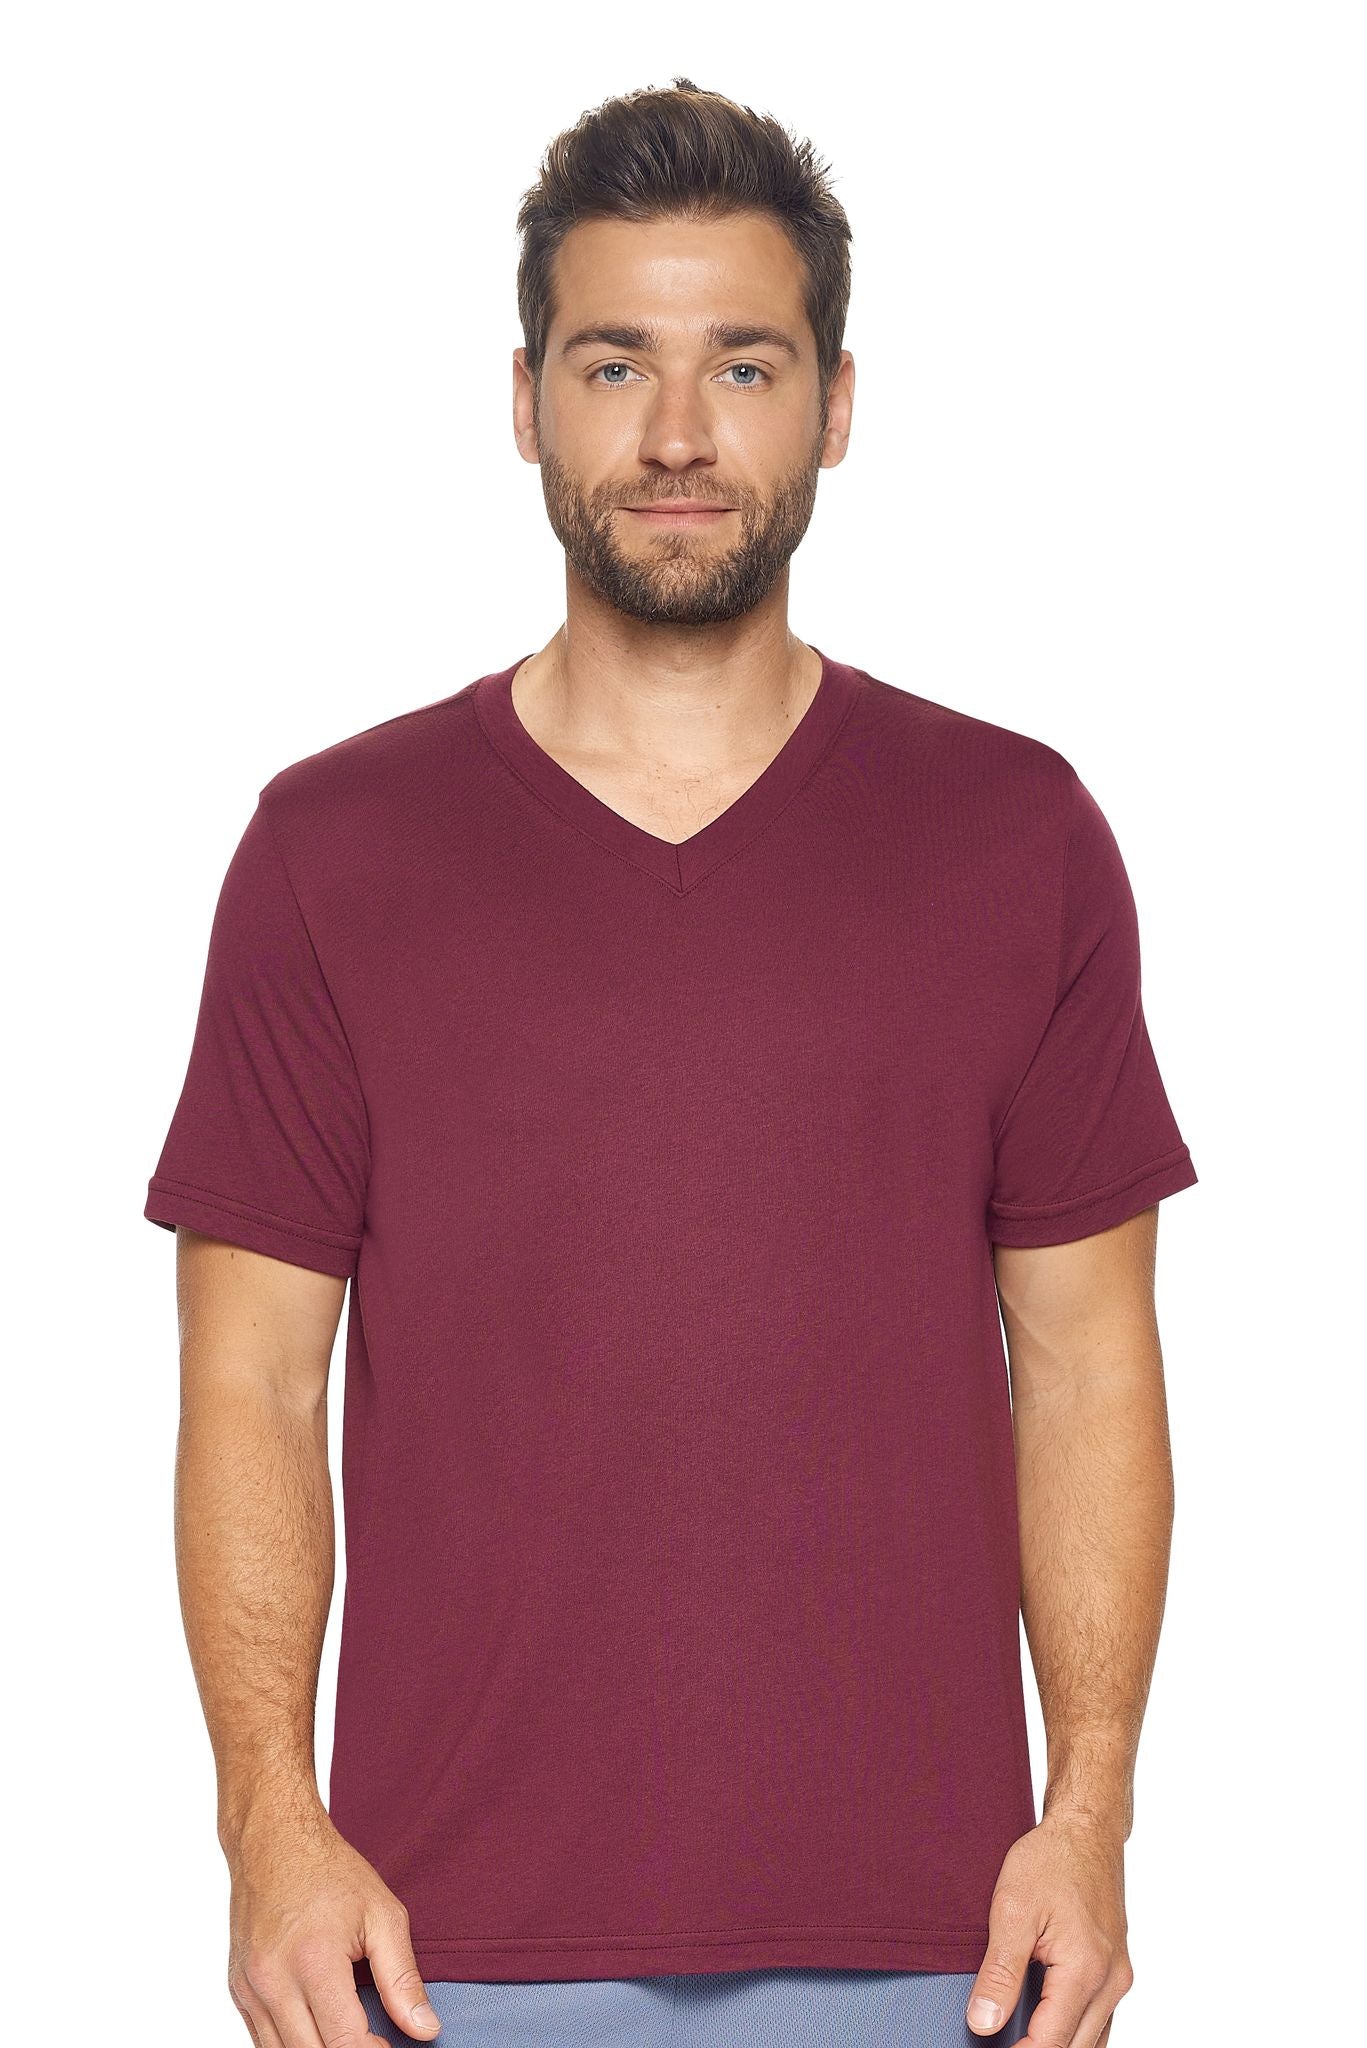 Expert Brand Wholesale Sustainable Eco-Friendly Apparel Micromodal Cotton Men's V-neck T-Shirt Made in USA maroon#maroon